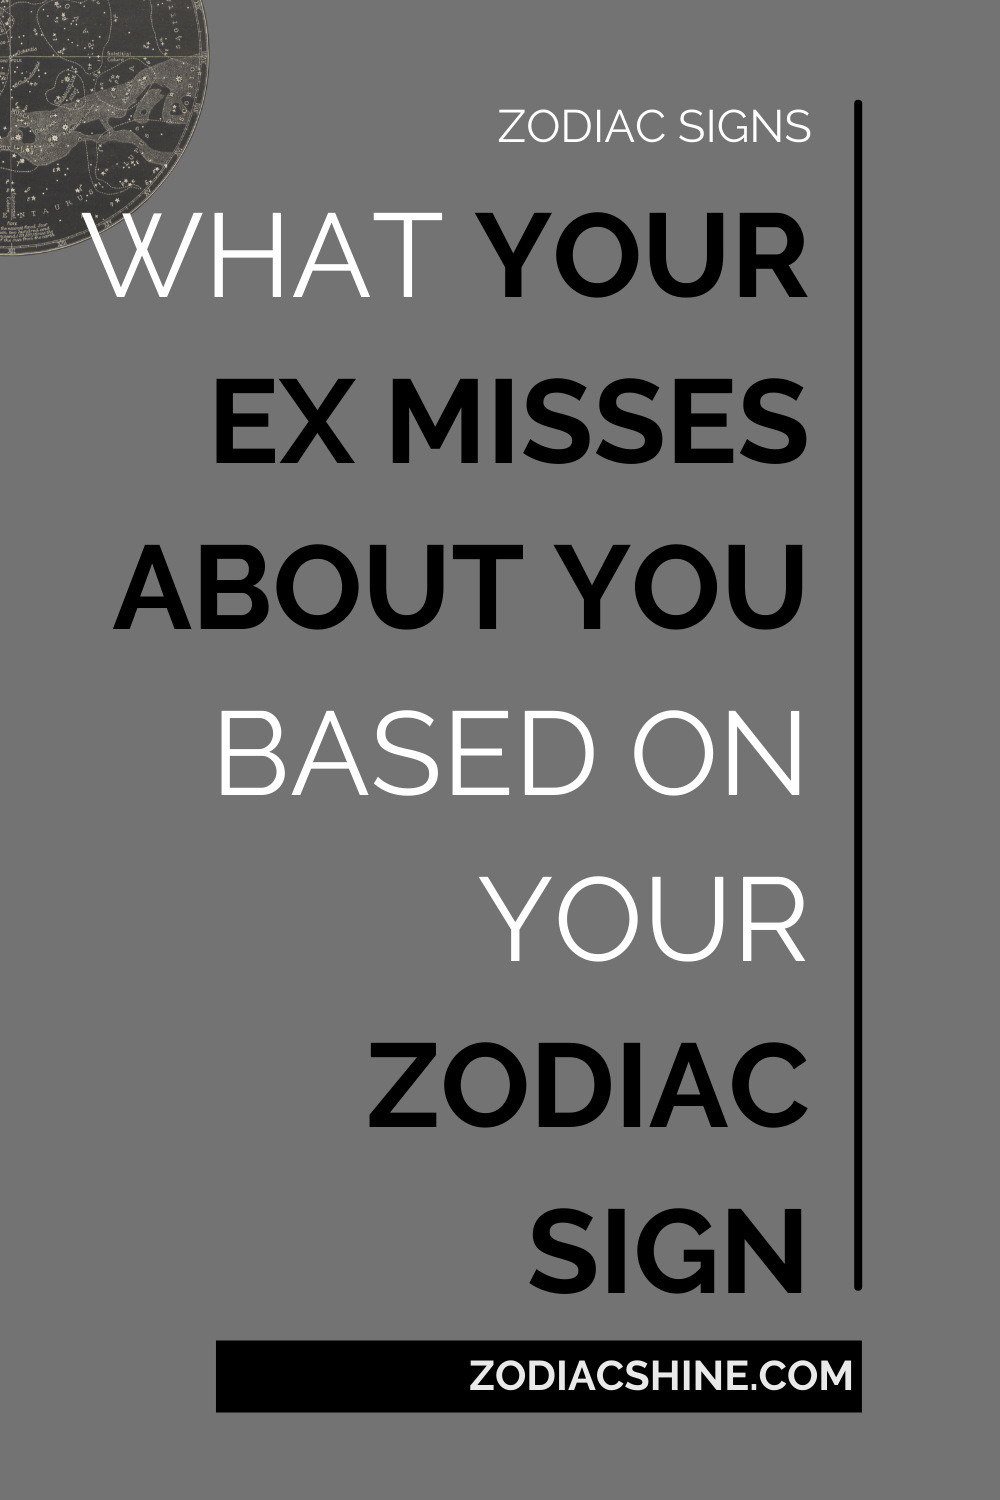 What Your Ex Misses About You Based On Your Zodiac Sign